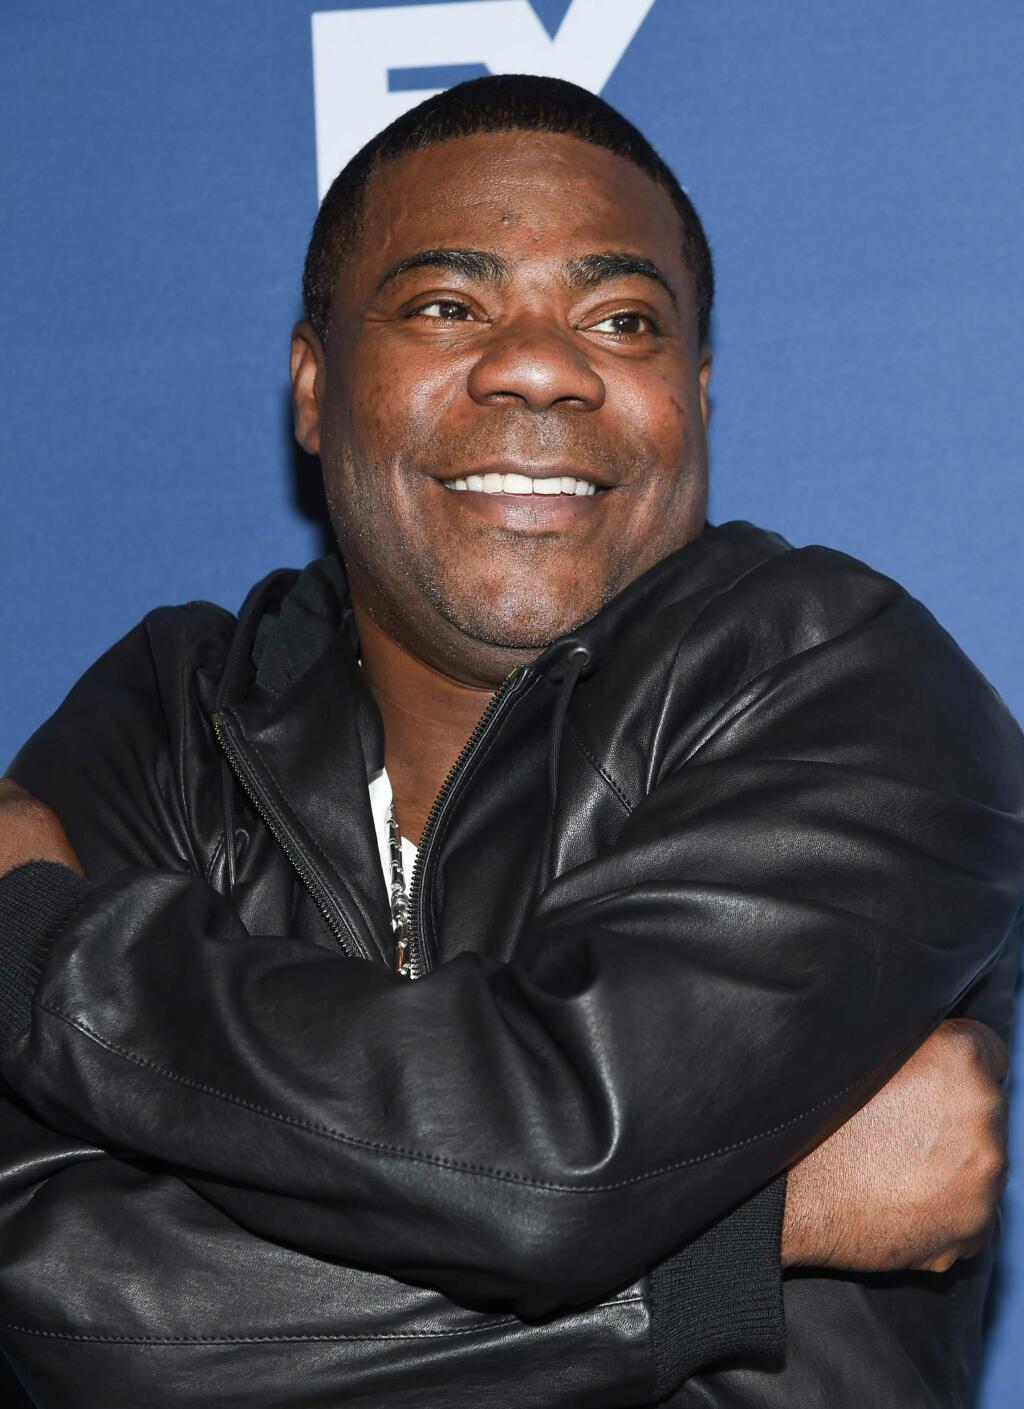 Tracy Morgan attends FX Networks upfront premiere of 'The People v. O.J. Simpson: American Crime Story' at the AMC Empire 25 on Wednesday, March 30, 2016, in New York. (Photo by Evan Agostini/Invision/AP)